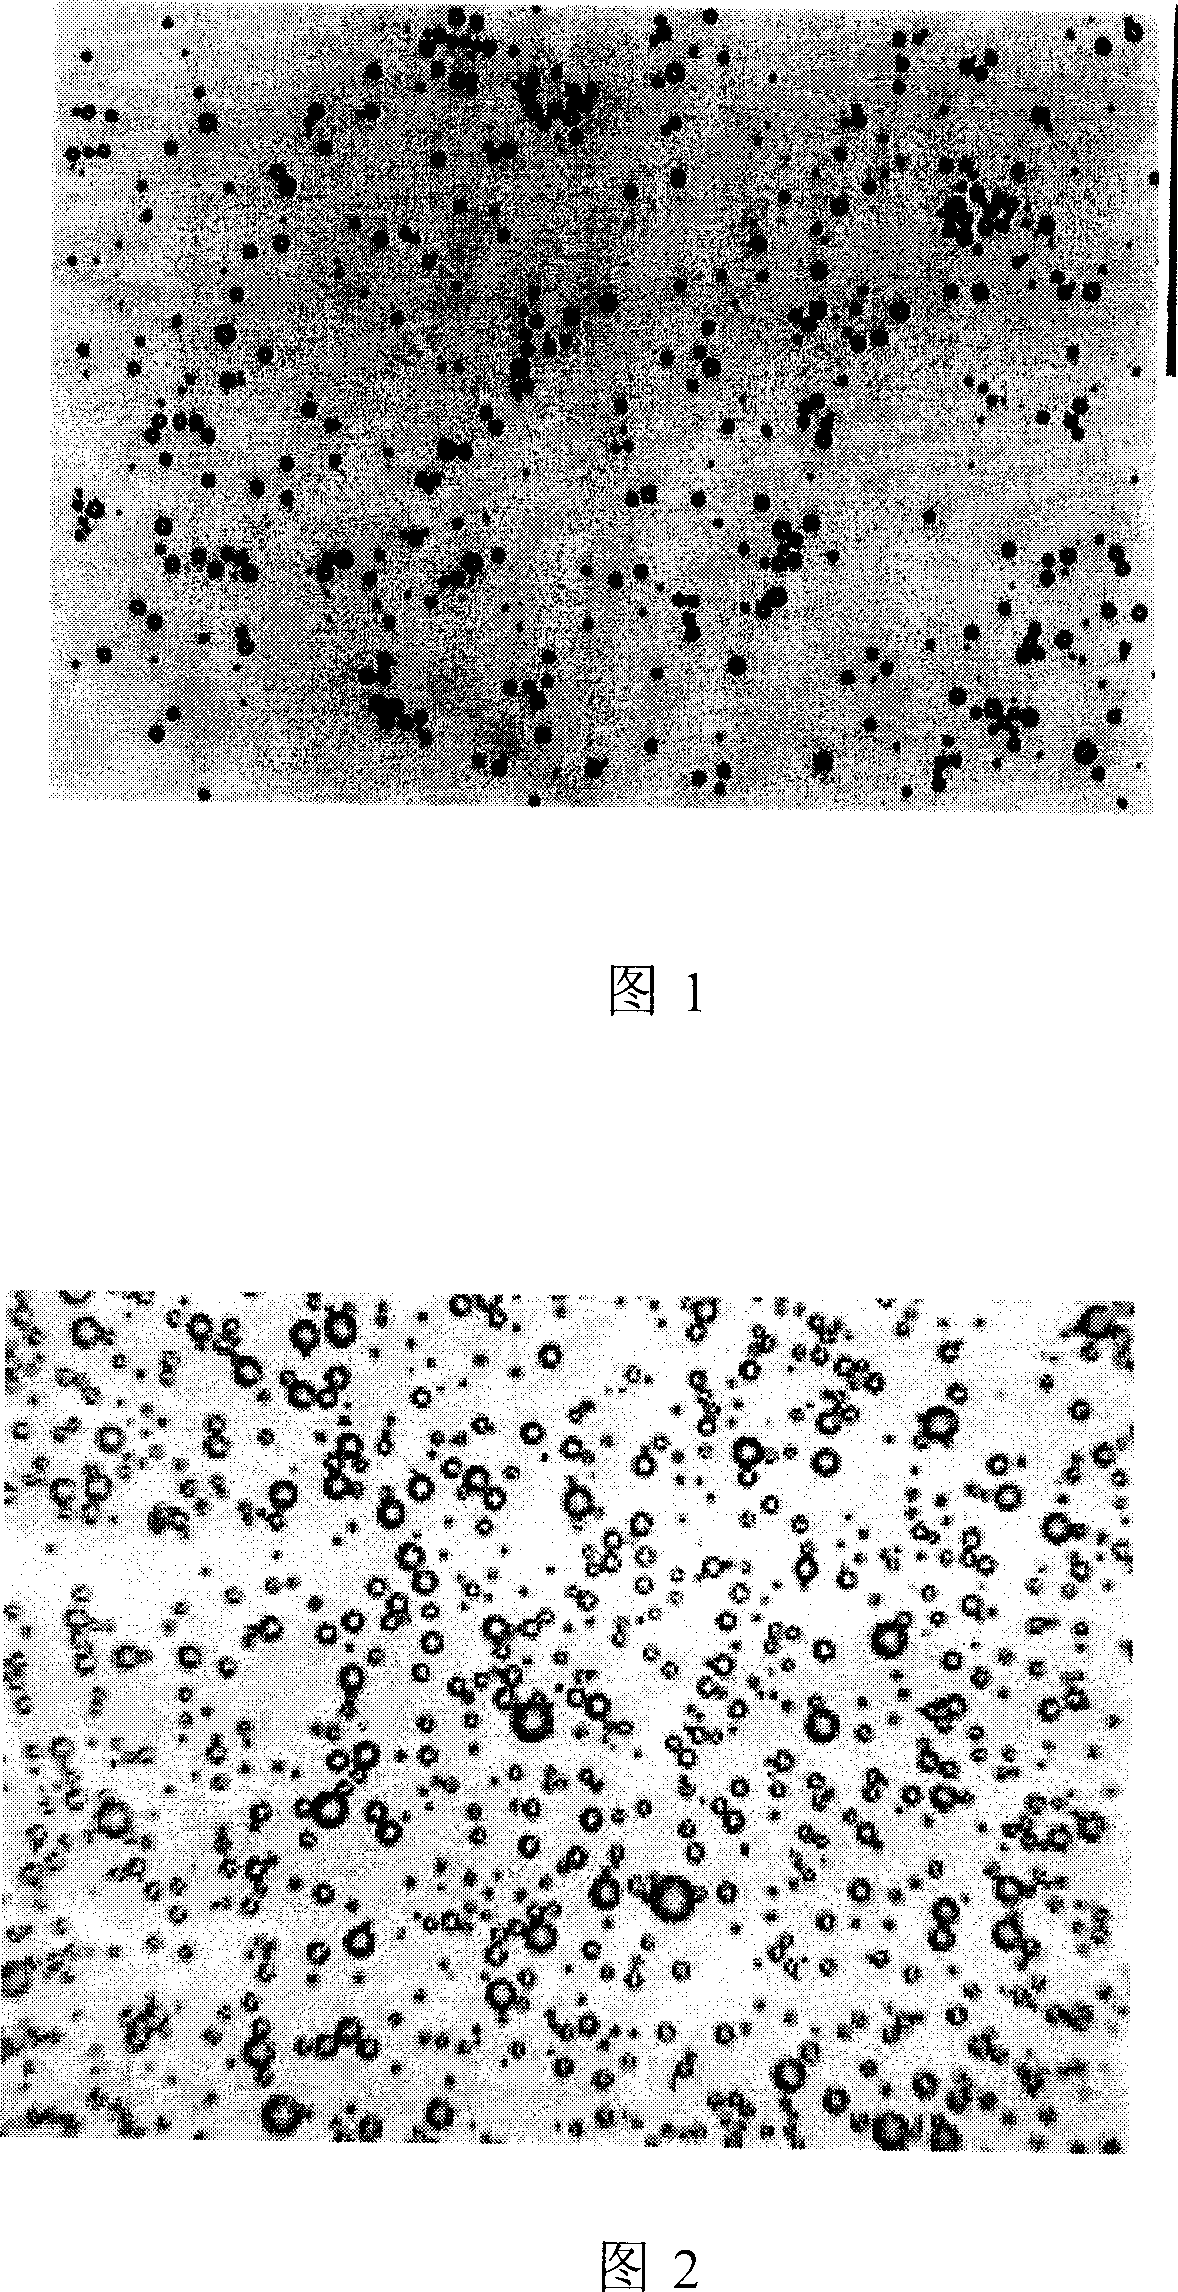 Ultrasonic microvesicle as immuno adjuvant and vaccine carrier